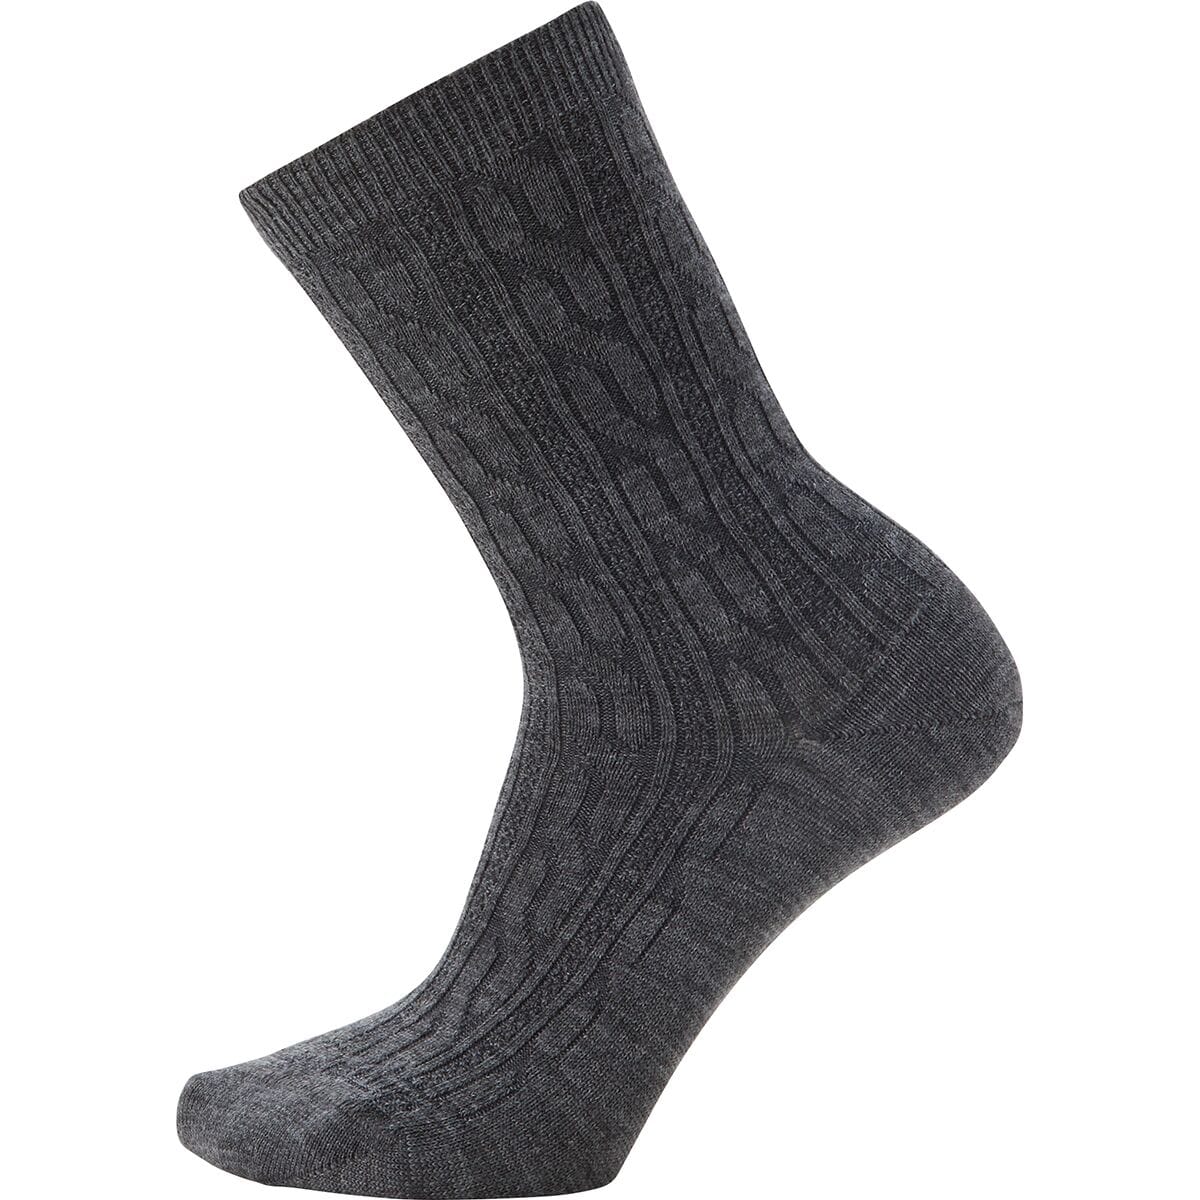 Smartwool Everyday Cable Crew Sock - Women's